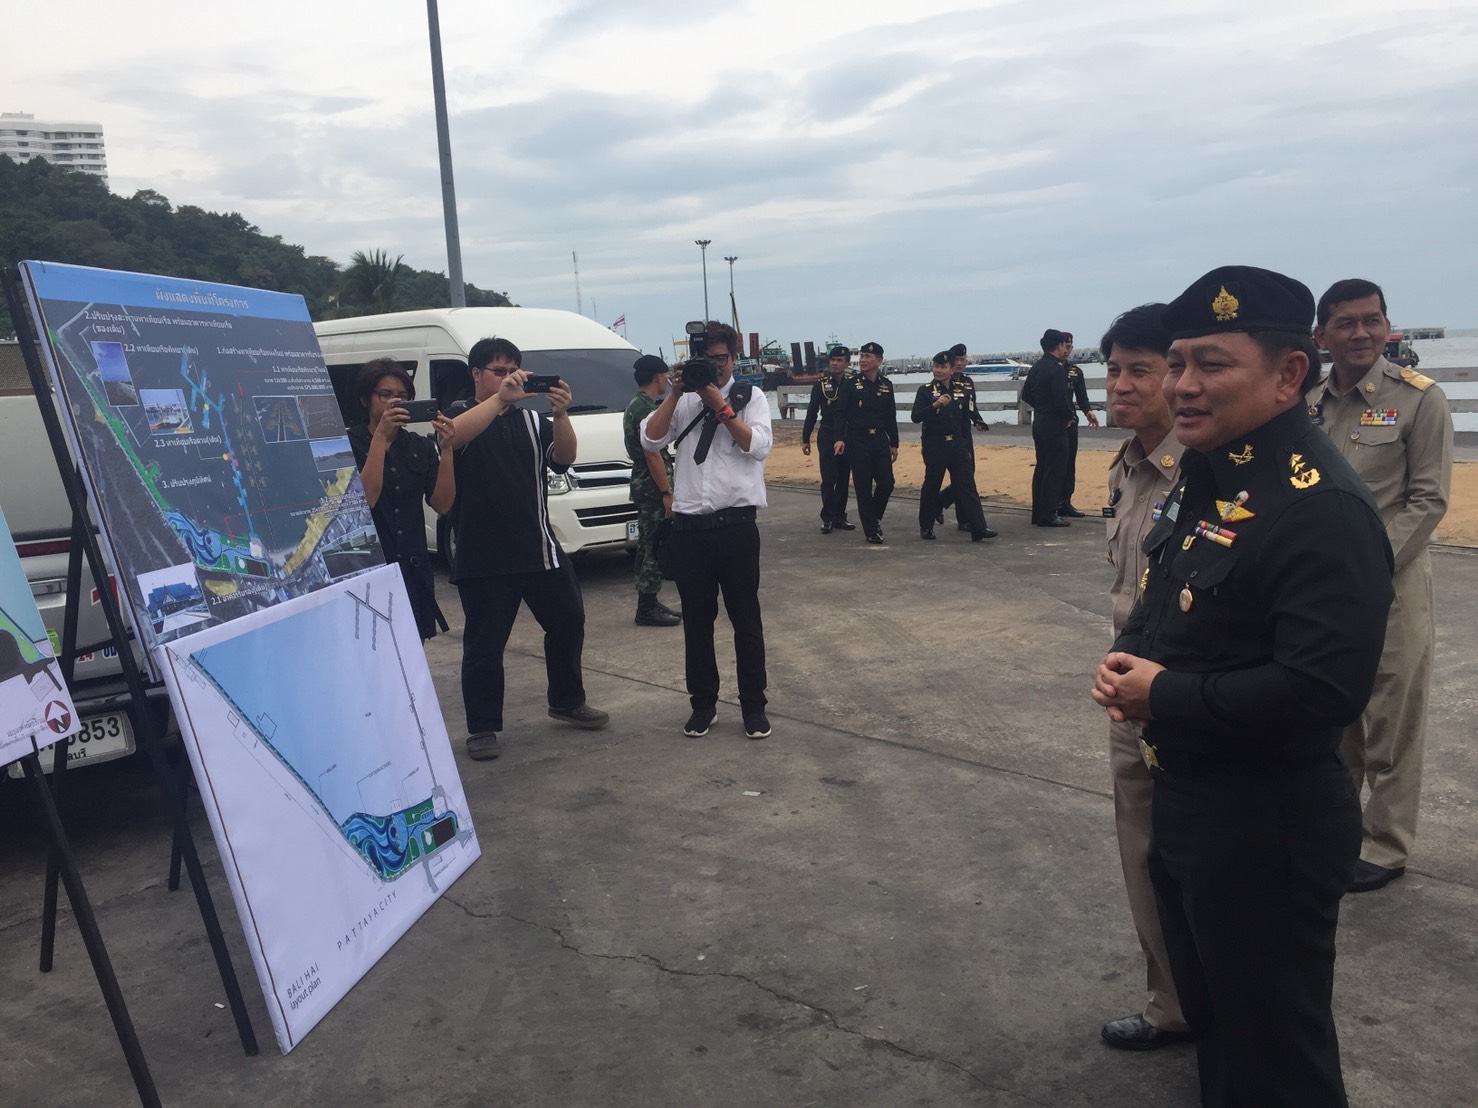 The Internal Security Operations Command, shown here inspecting the work done at Bali Hai, advised eastern provinces to work together to solve the transportation, agriculture, labor and environmental issues facing the region.